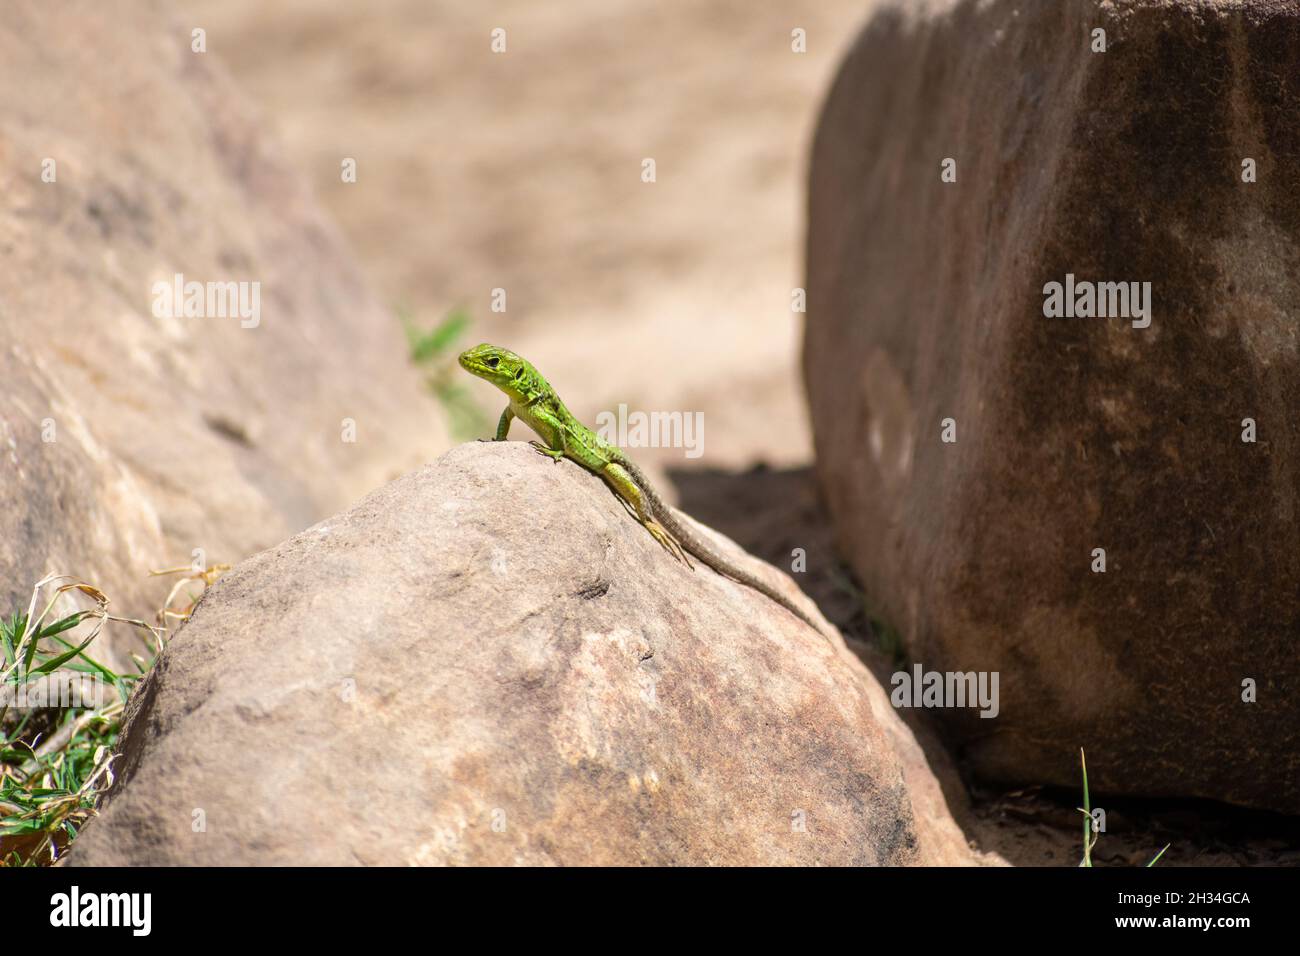 Close-up shot of (Timon pater) North African Ocellated Lizard Stock Photo